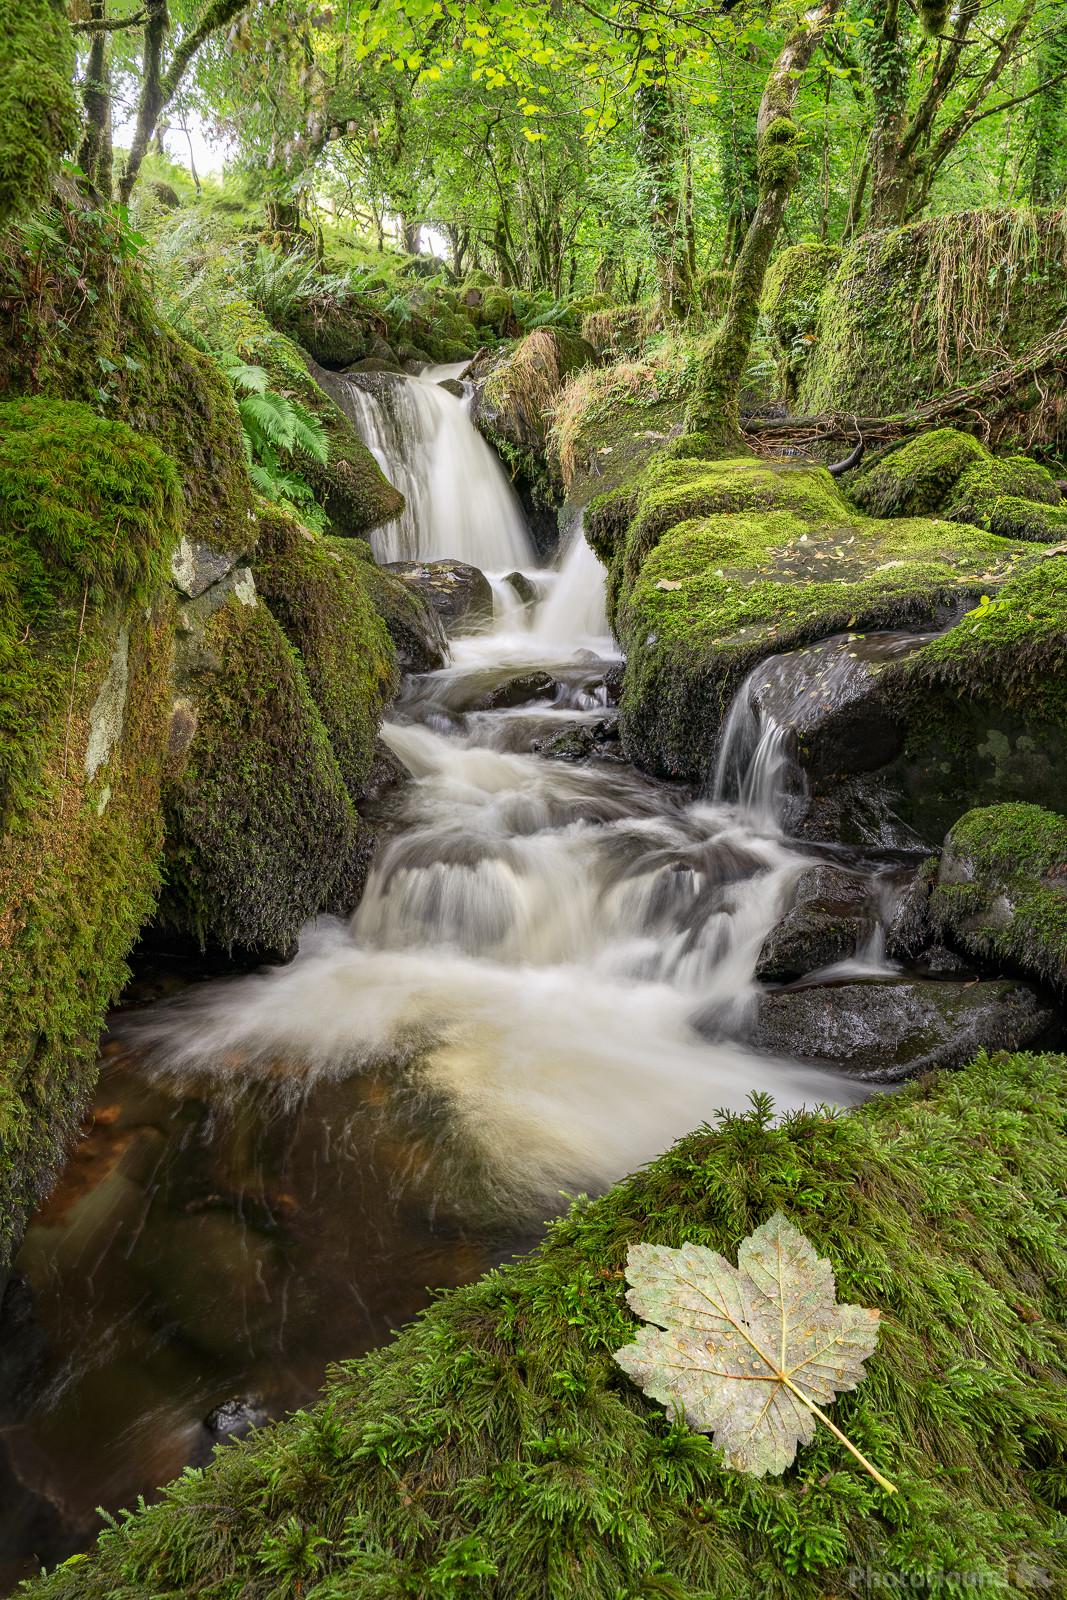 Image of Colly Brook Waterfalls by Richard Fox